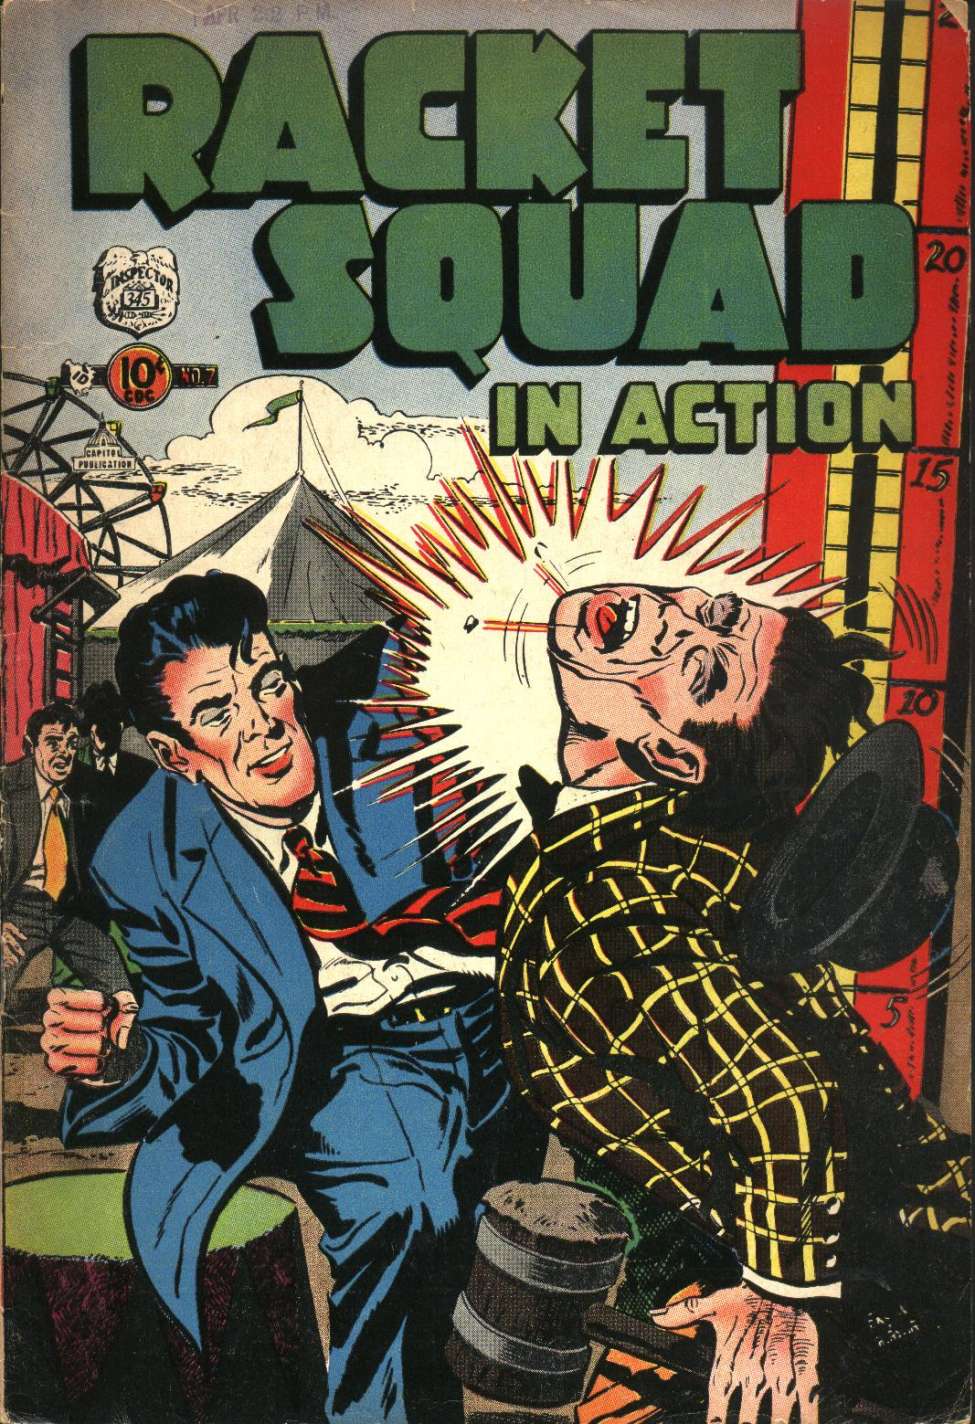 Comic Book Cover For Racket Squad in Action 7